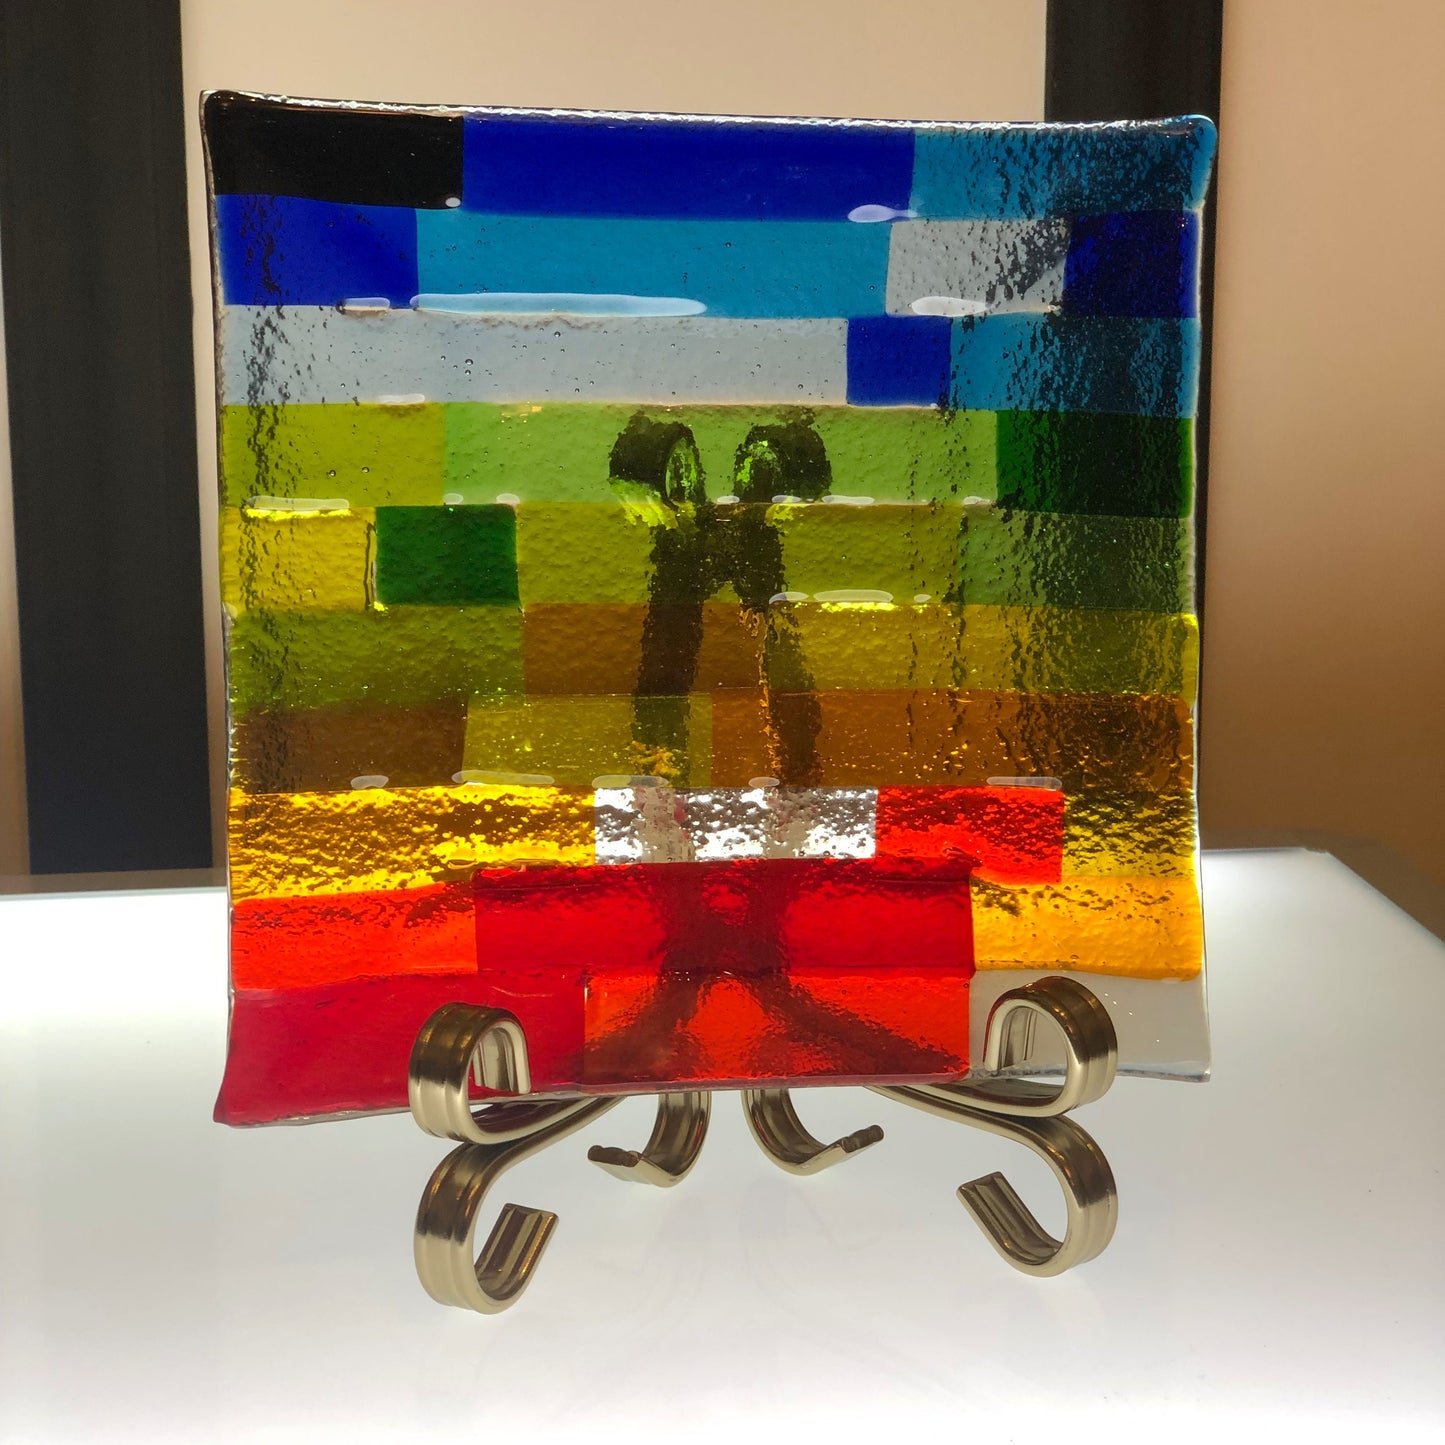 Fused Glass Plate, Modern & handmade rainbow colors plate, unique gift